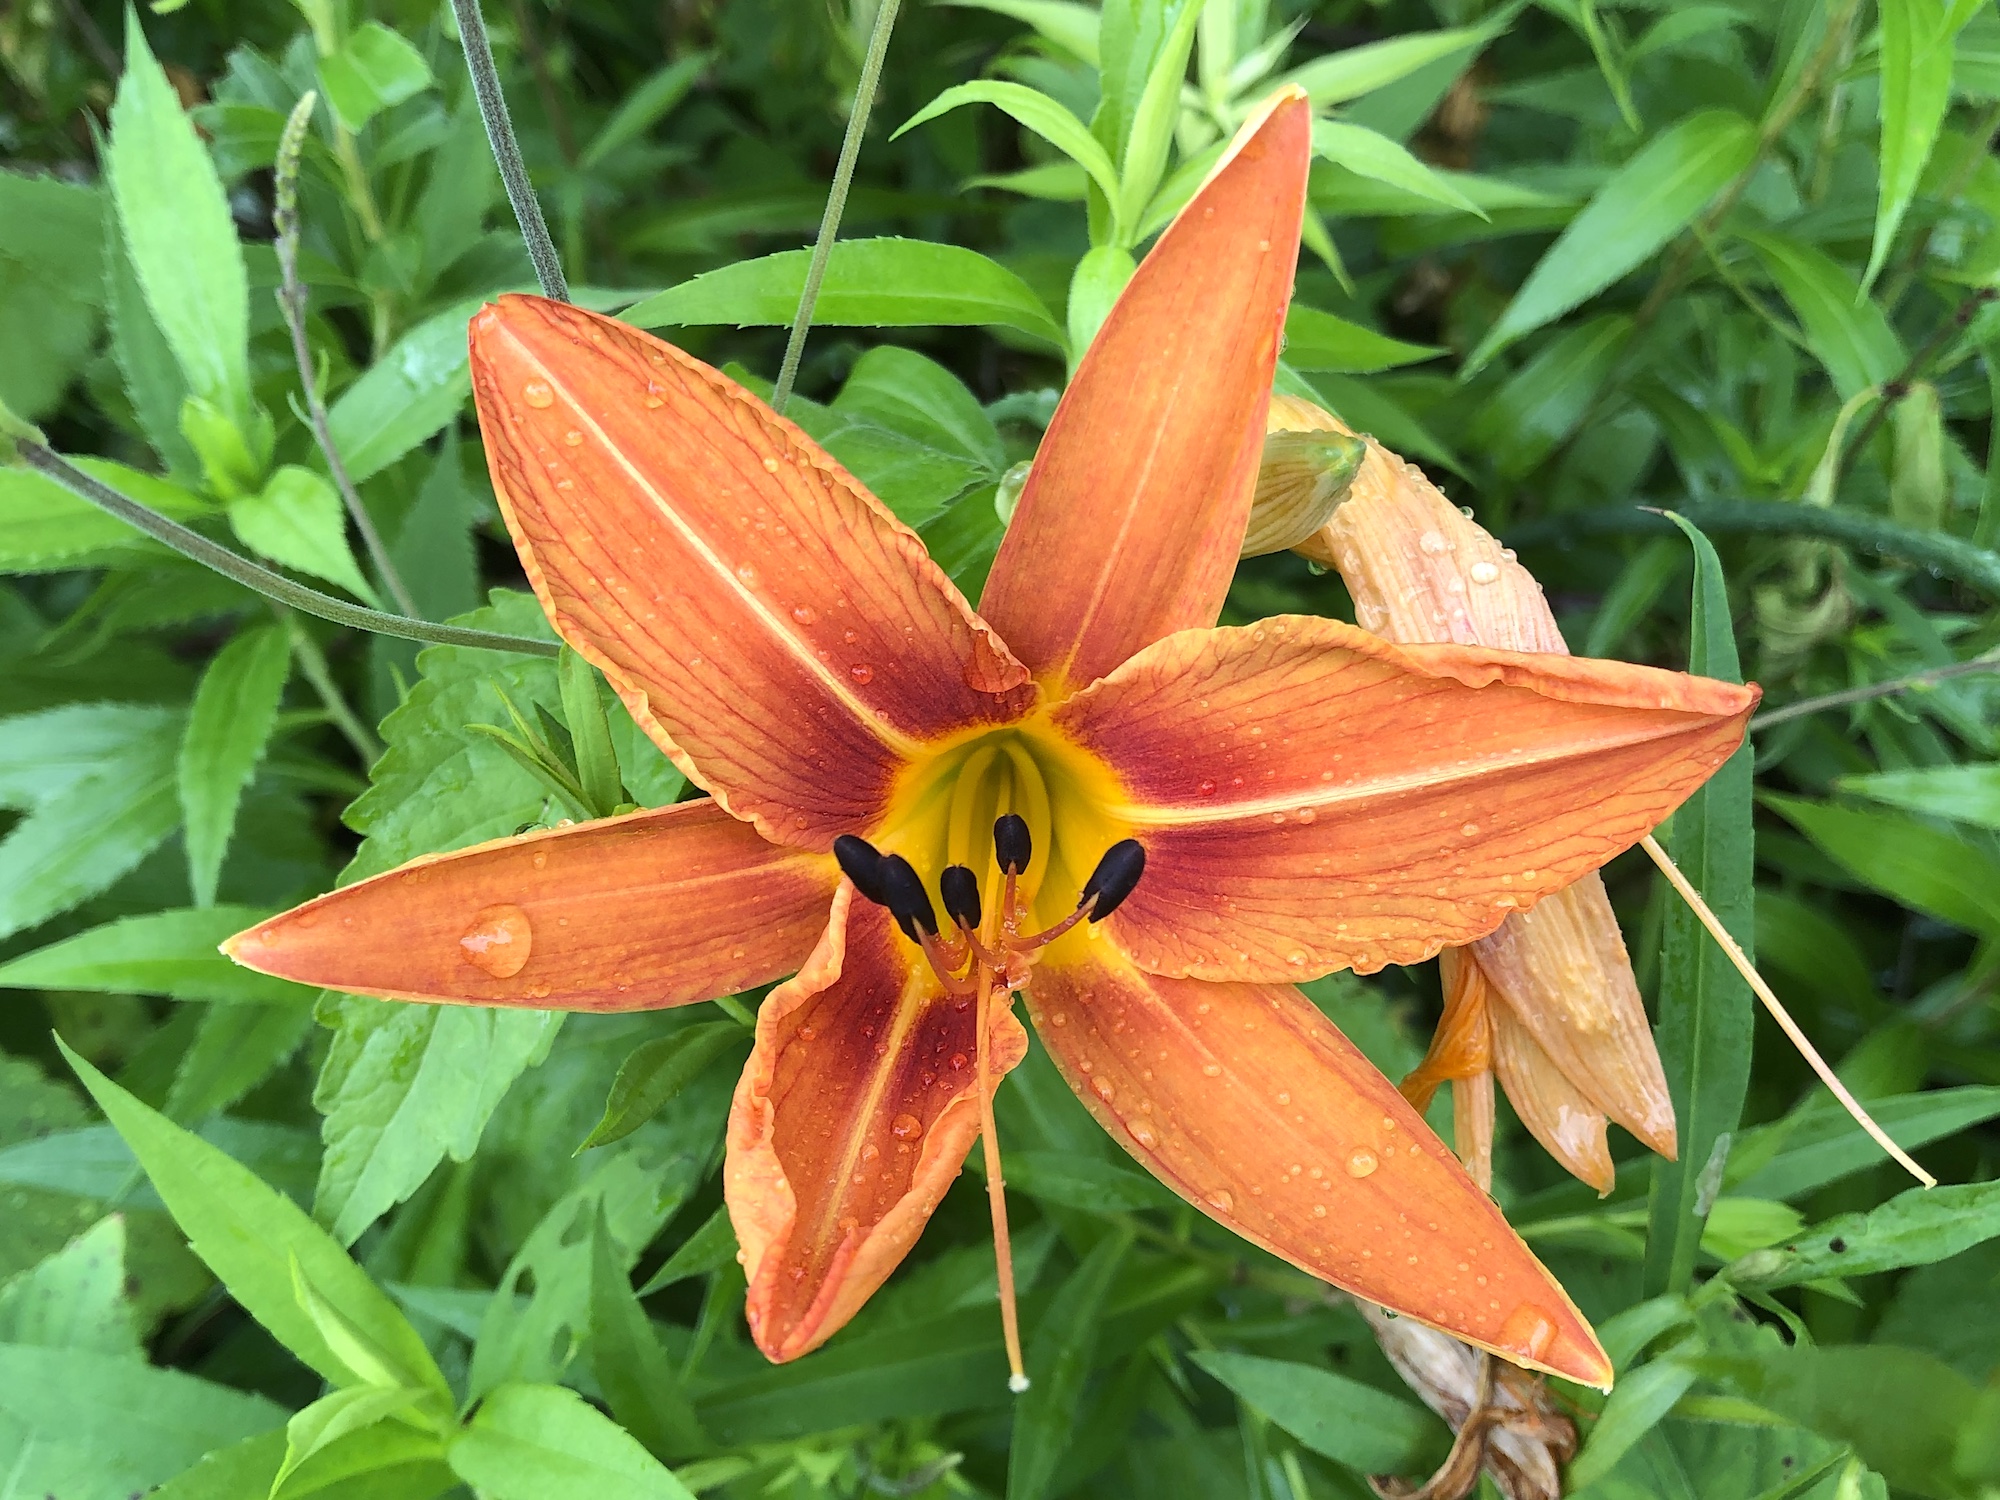 Orange Day Lily on edge of woods by Oak Savanna in Madison, Wisconsin on July 6, 2019.